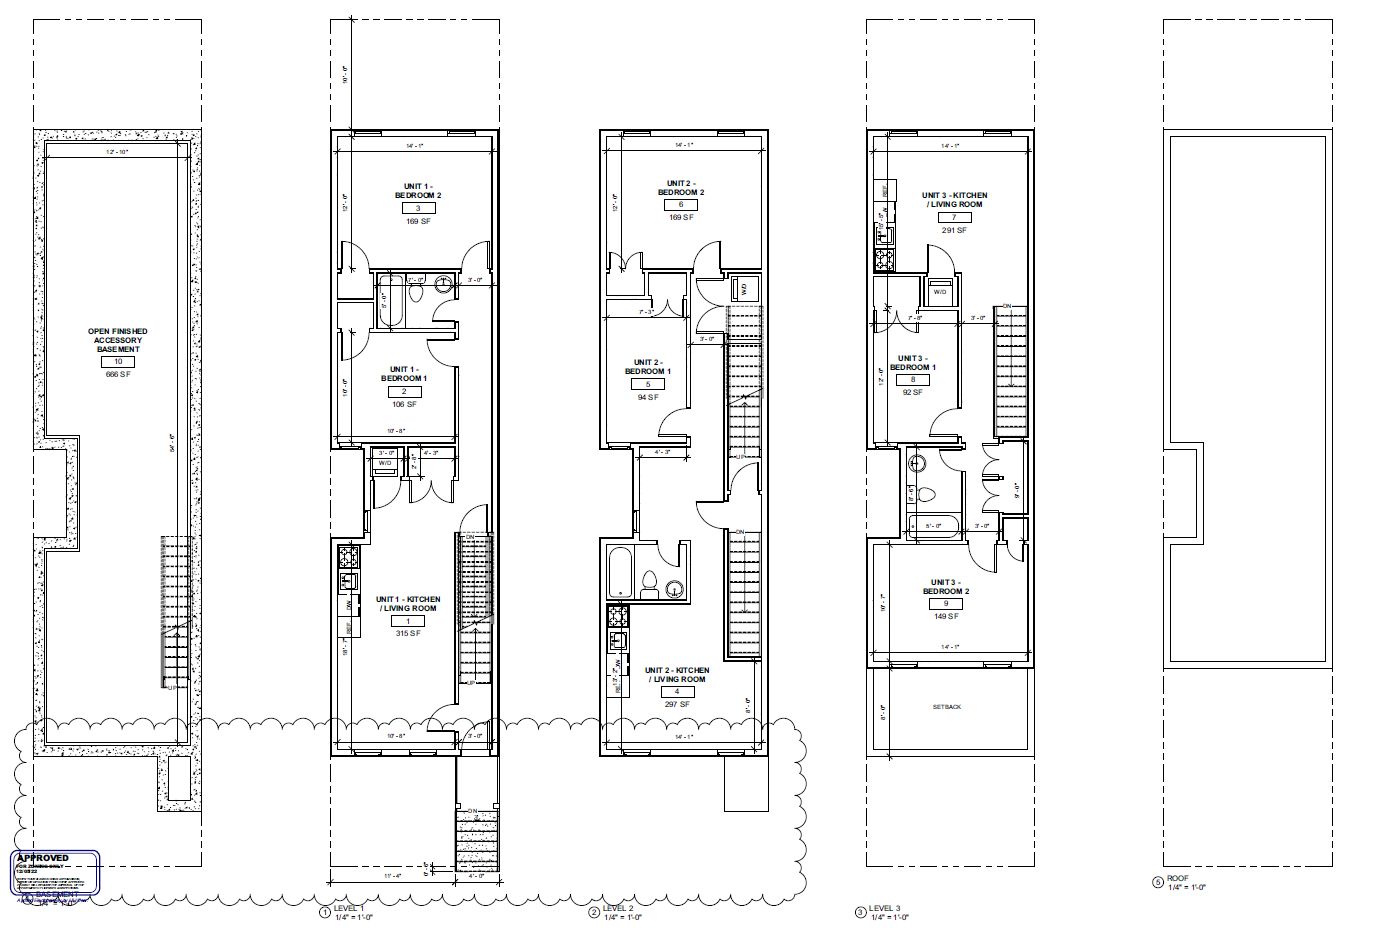 917 North 43rd Street. Floor plans (original version). Credit: J Design and Consultants via the Department of Planning and Development of the City of Philadelphia